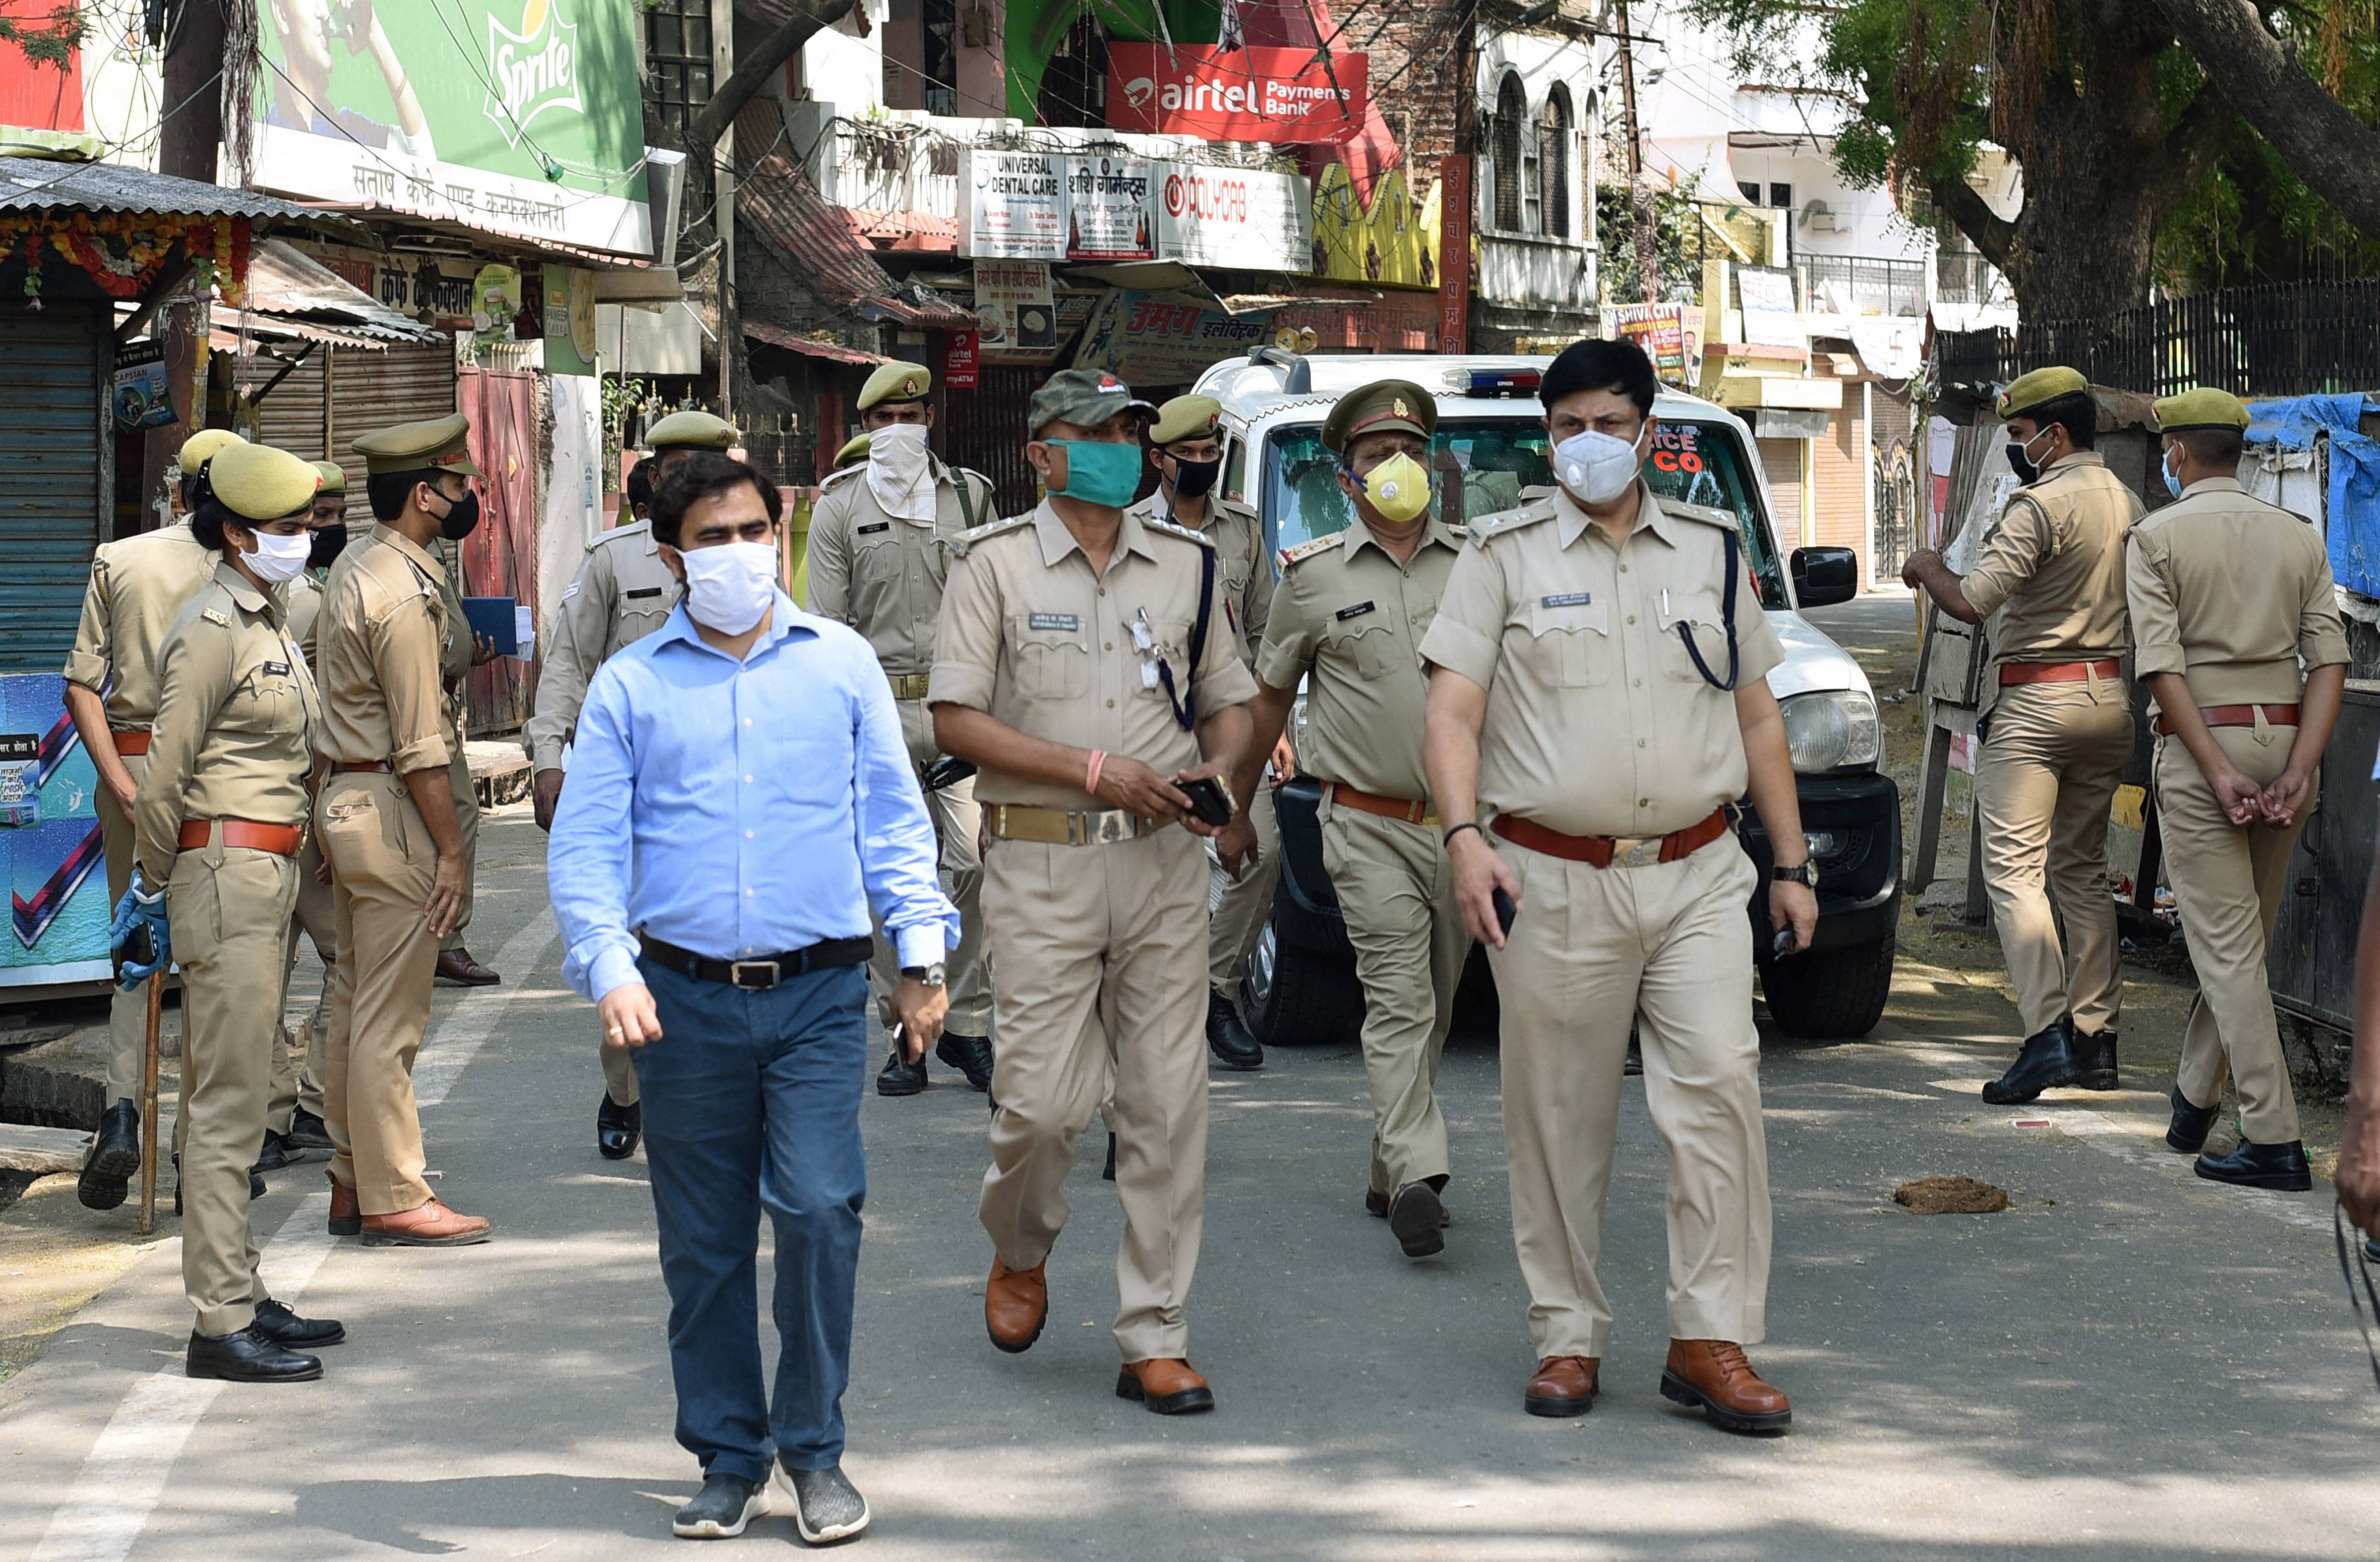 Police personnel patrol in Telierganj area, identified as a COVID-19 hotspot, during the nationwide lockdown to curb the spread of coronavirus. (PTI Photo)